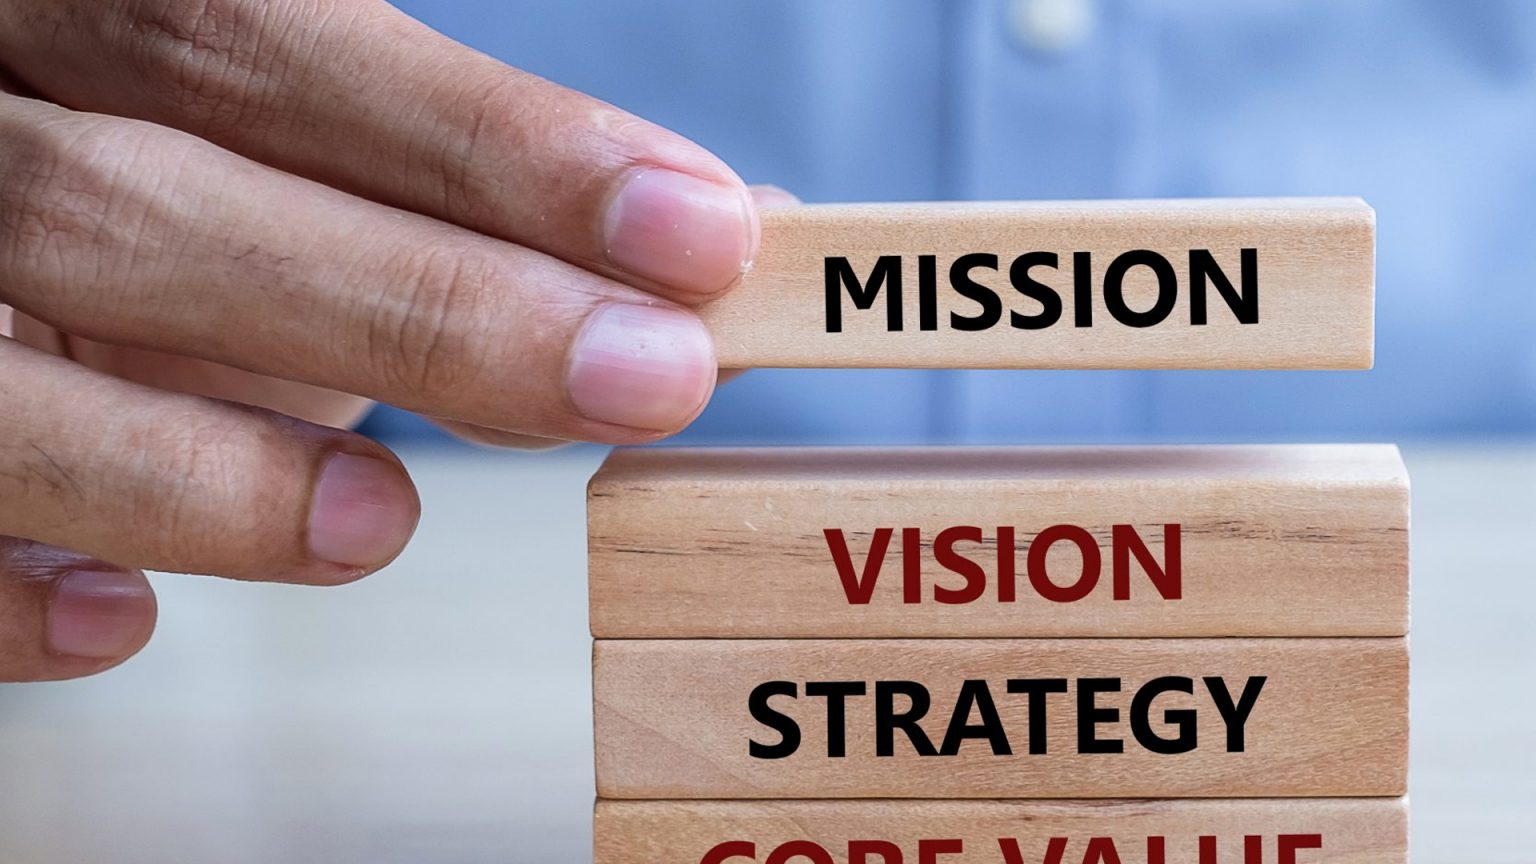 Mission and Vision. Supporting documentation